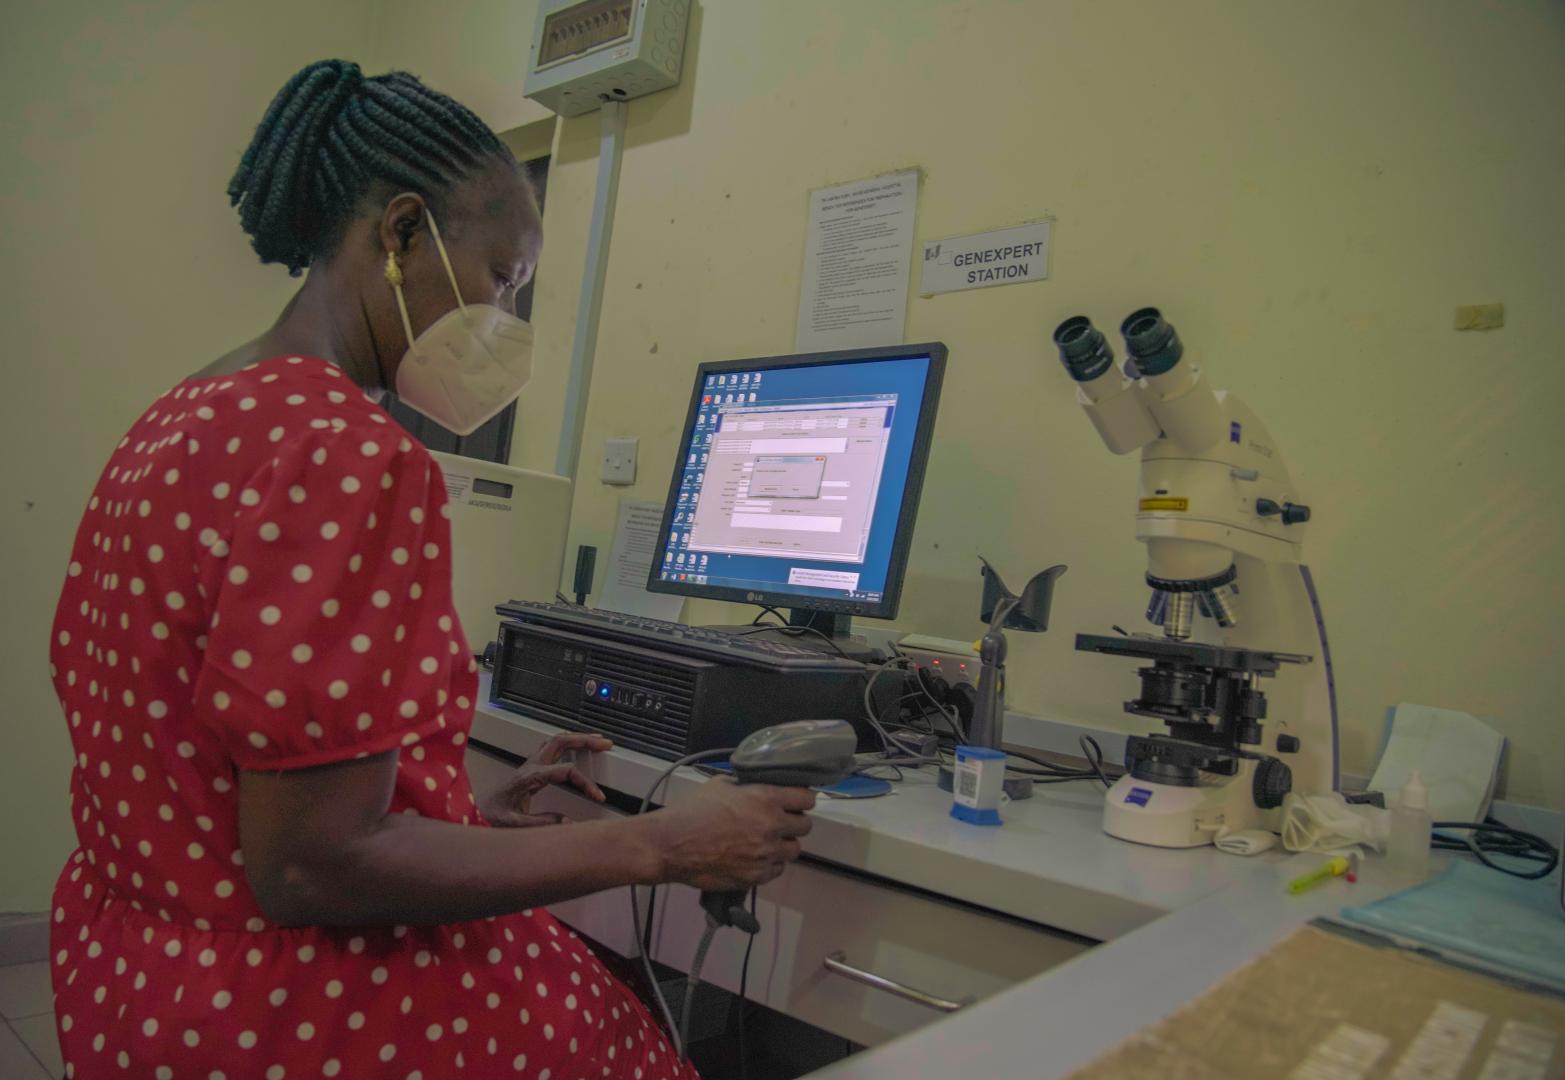 Intensifying new initiatives for TB case-finding in Nigeria